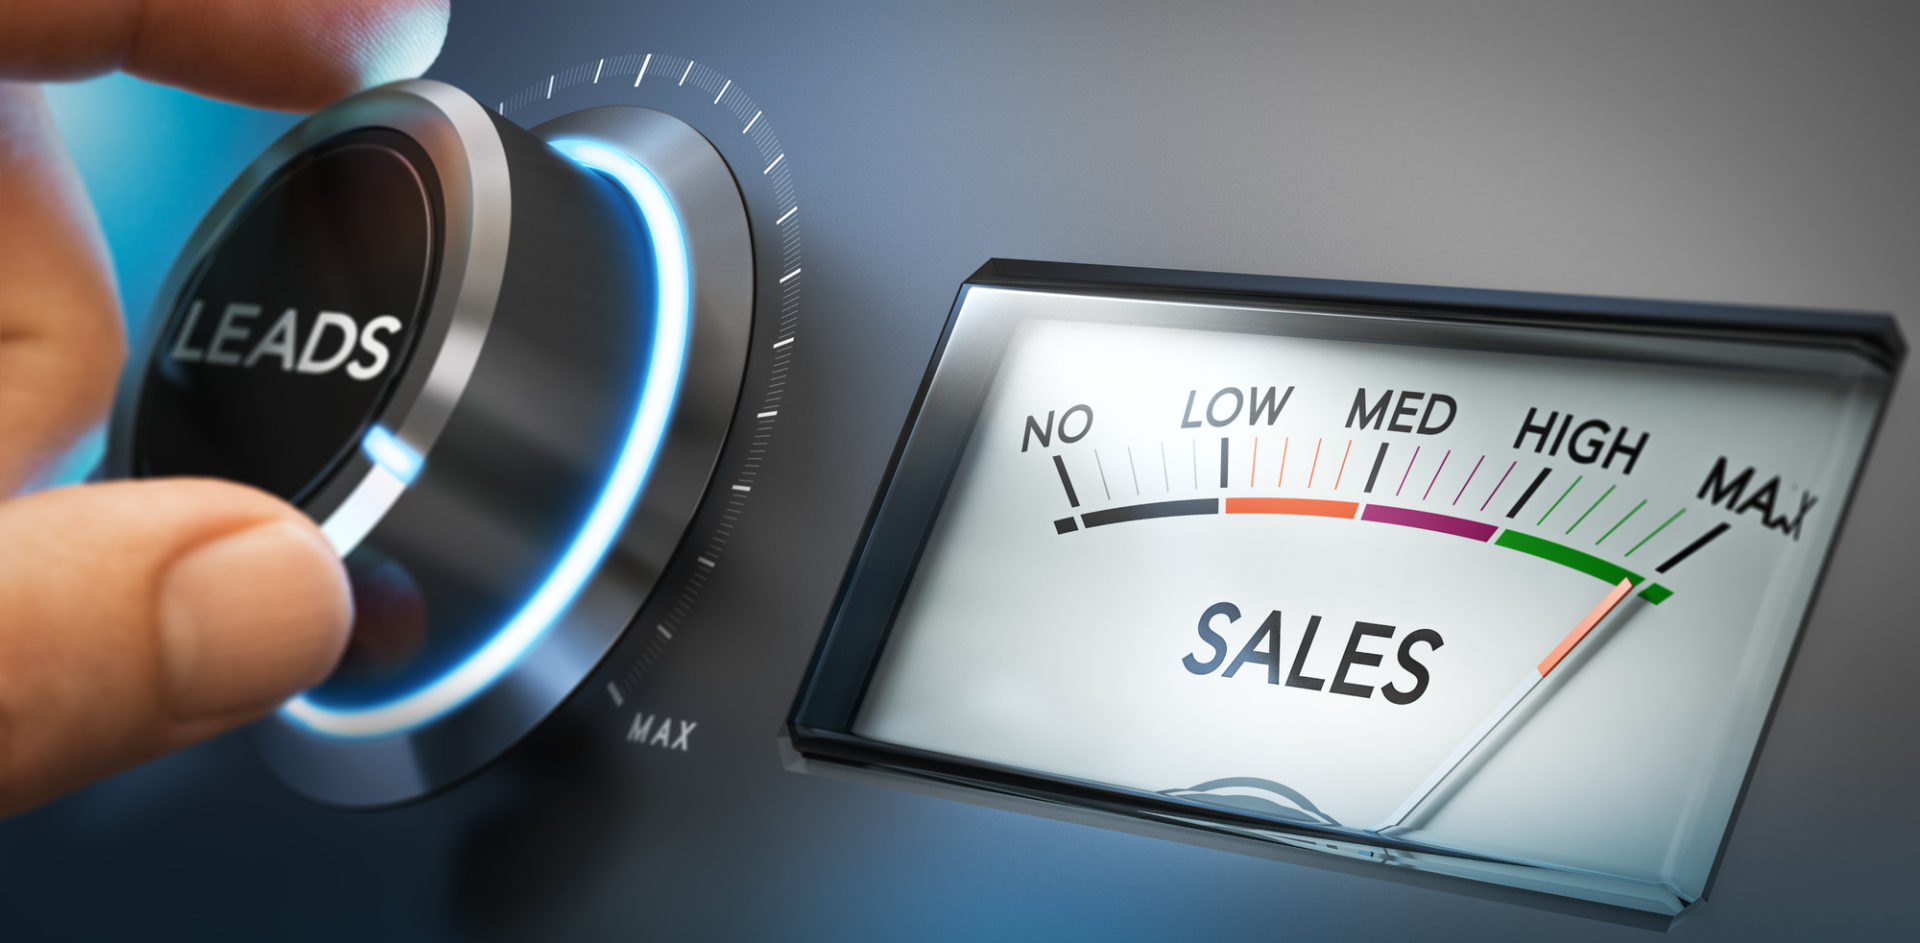 A website serves a number of purposes, but for a small business owner the number purpose has to be to drive sales. Learn how to boost sales with these 10 simple design tips that can make all the difference.